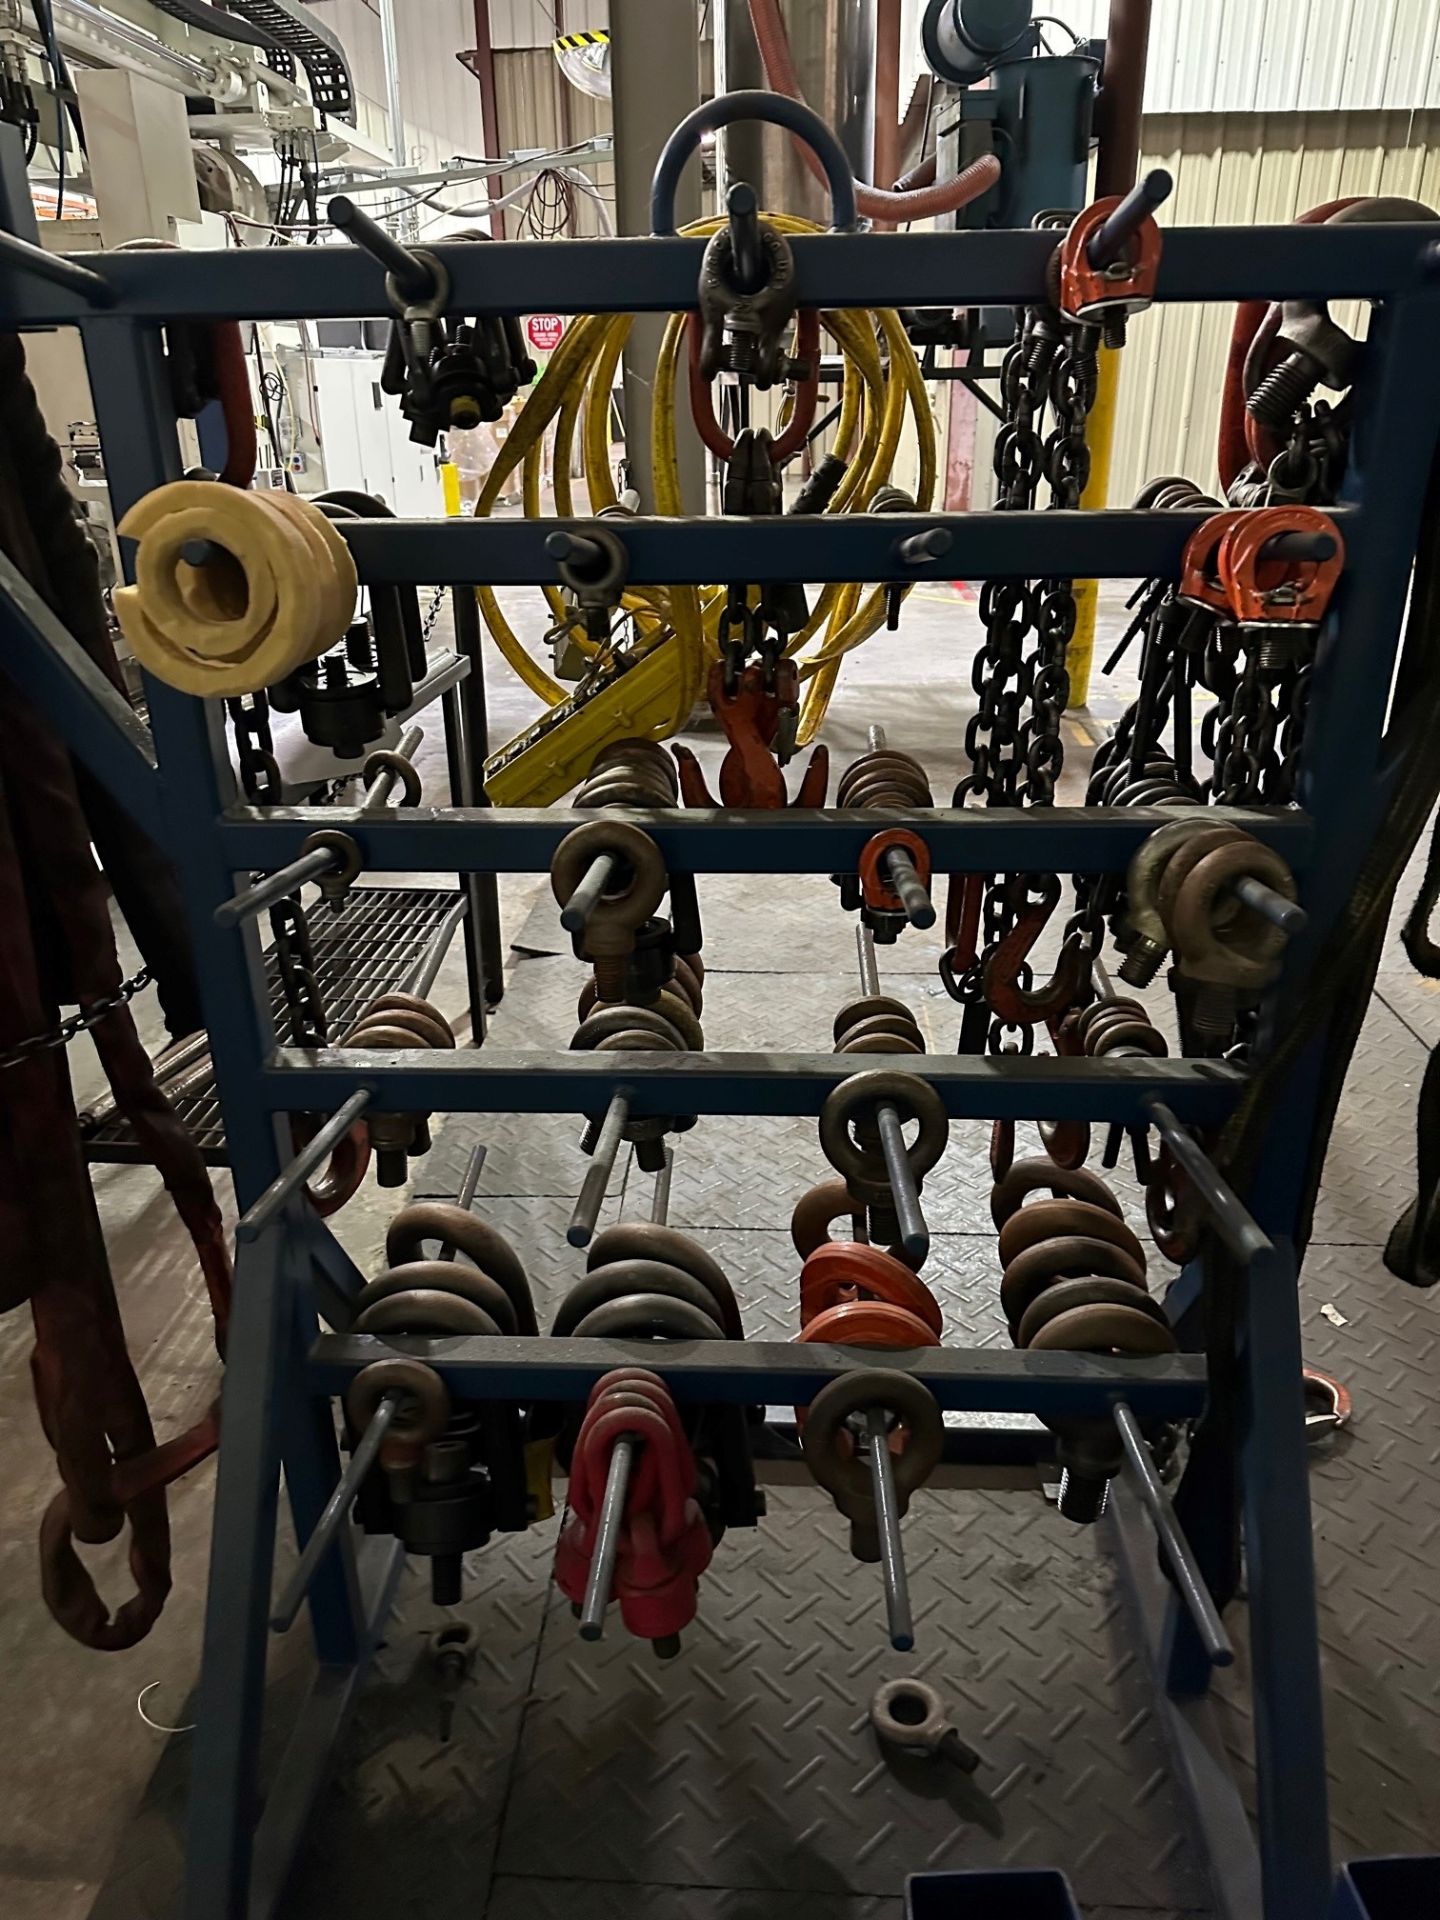 (LOT) LIFTING EQUIPMENT INCLUDING CHAINS, LIFTING EYES, SLINGS AND RELATED - Image 3 of 3